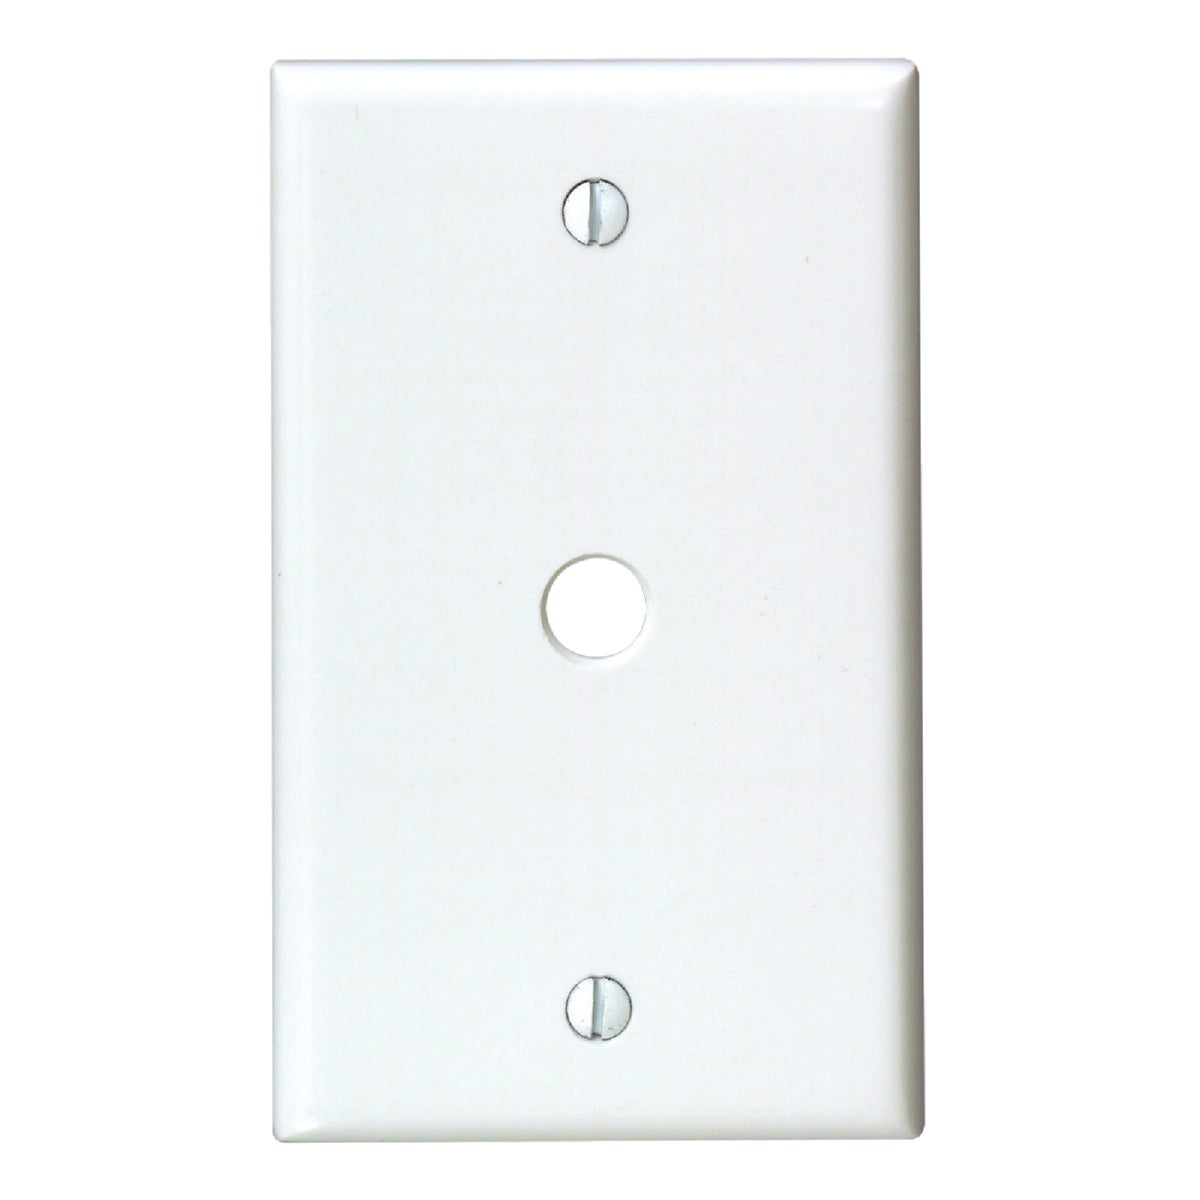 Phone/Cable Wall Plate